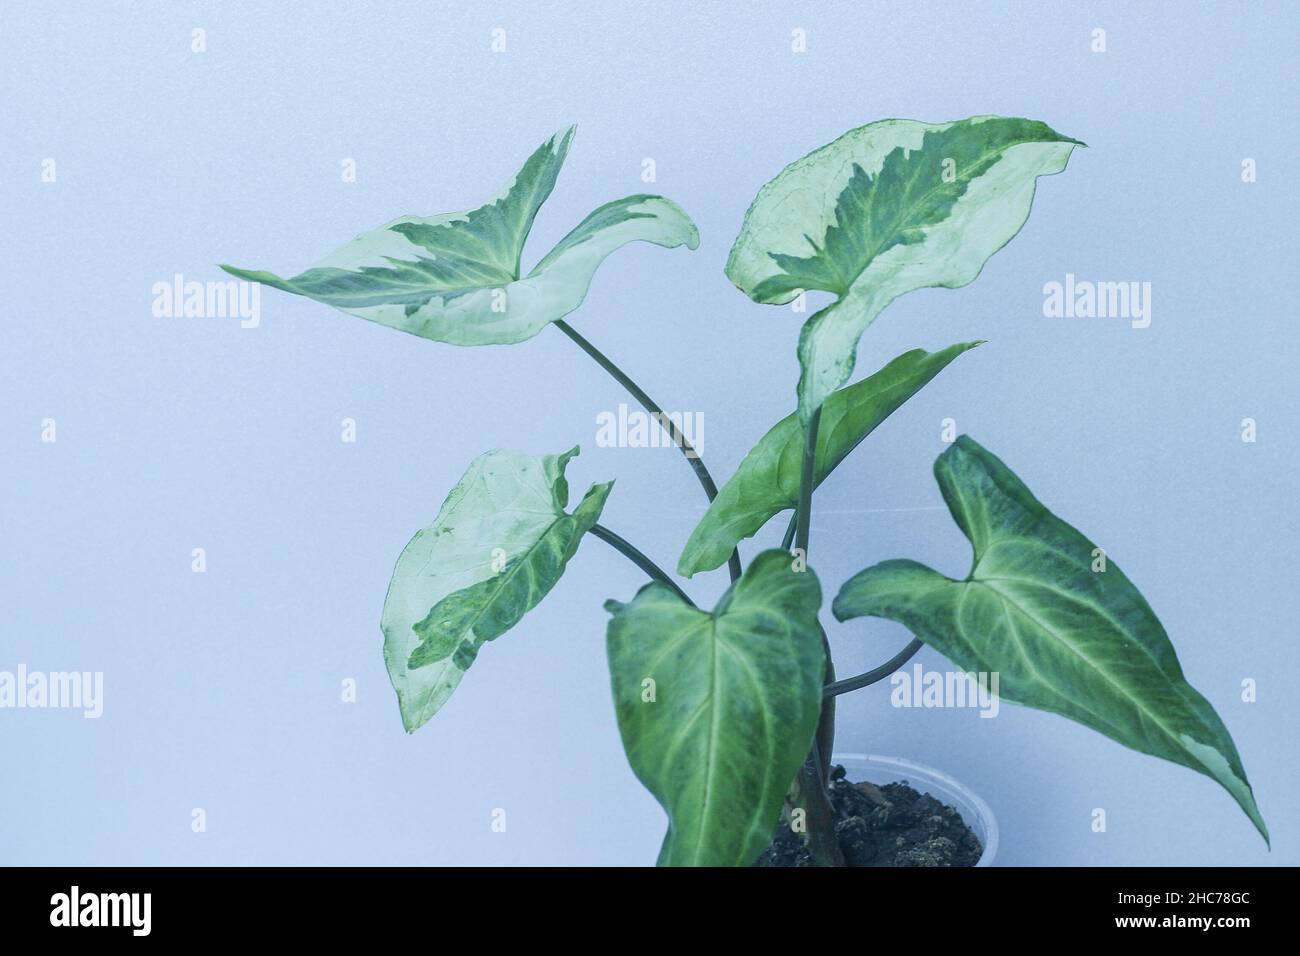 Syngonium Three Kings potted house plant Stock Photo